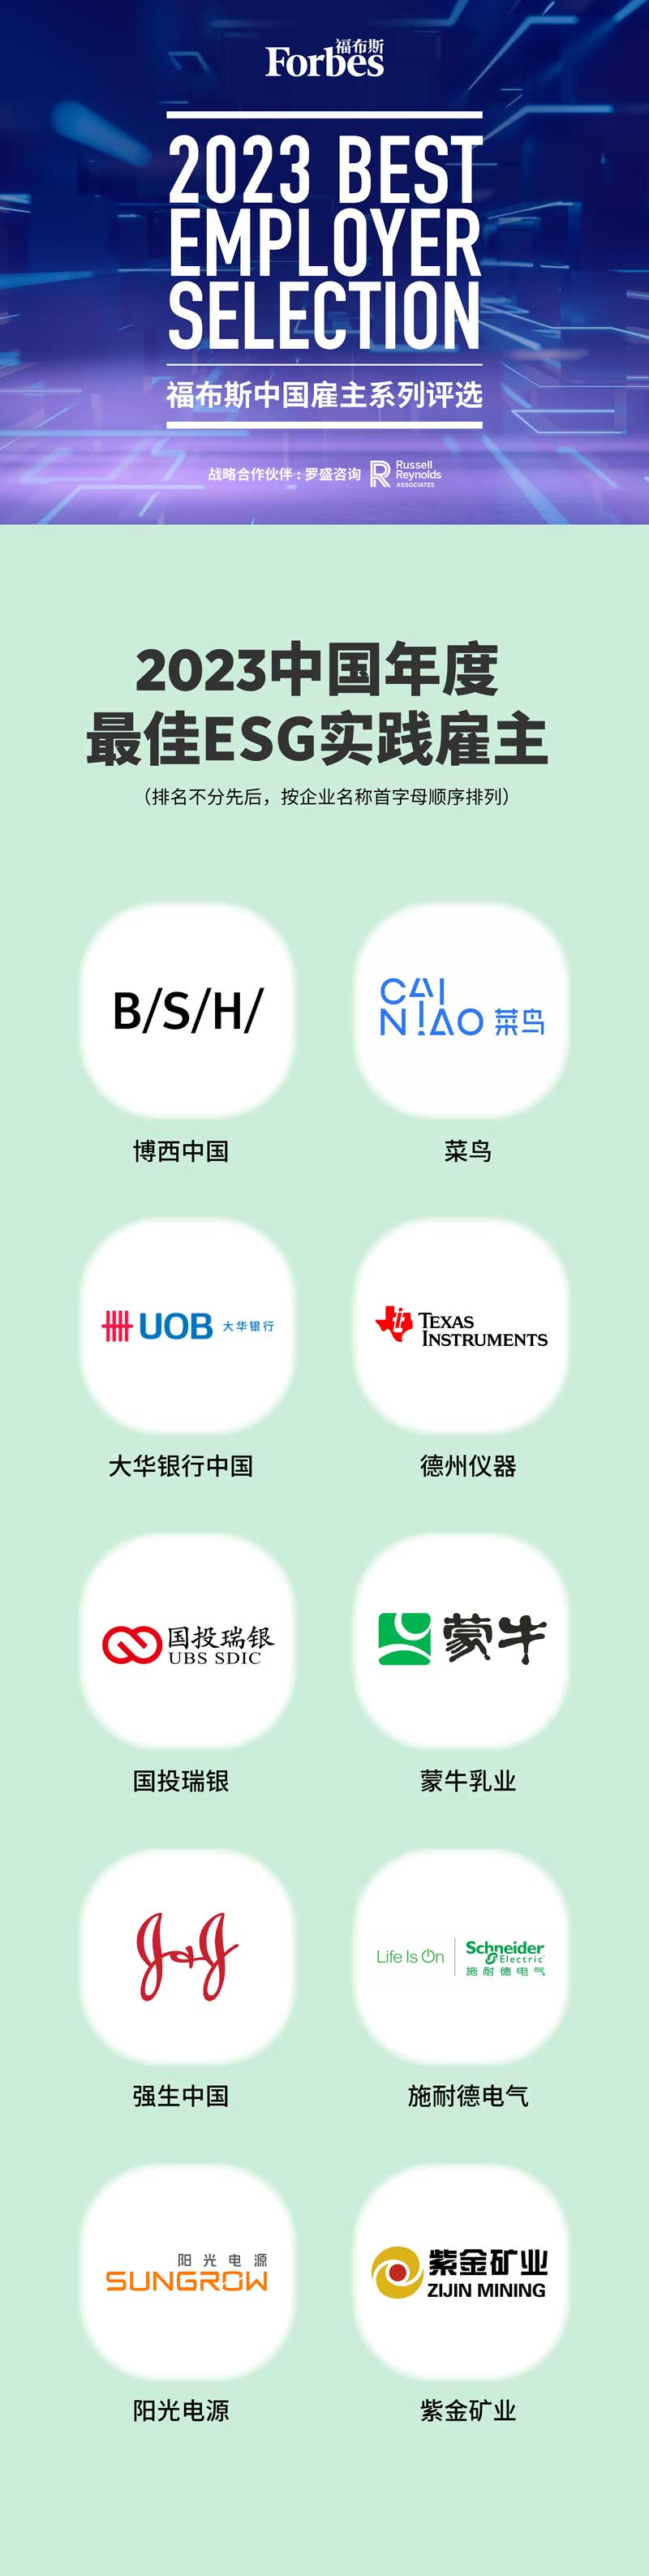 Forbes China best employer - ESG category